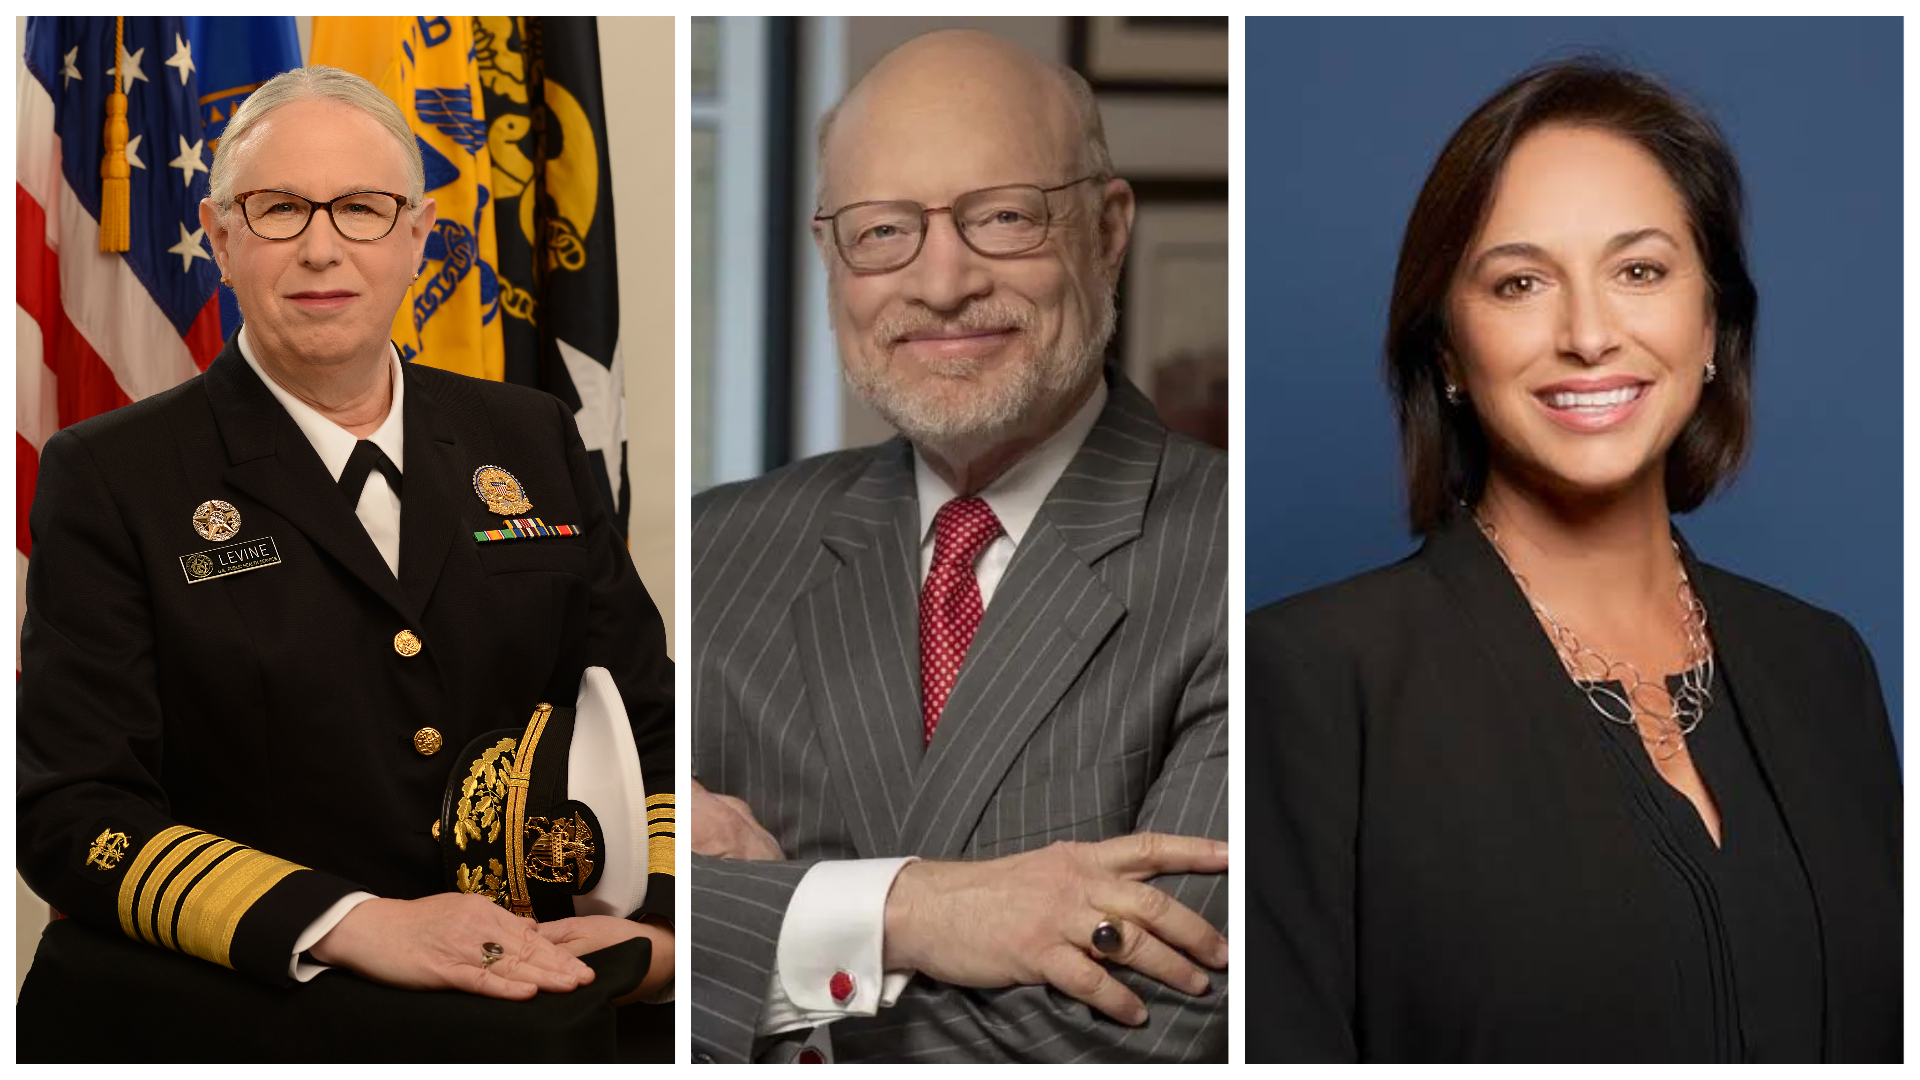 This is a collection of images featuring Admiral Rachel Levine, Chip Kahn and Karen DeSalvo